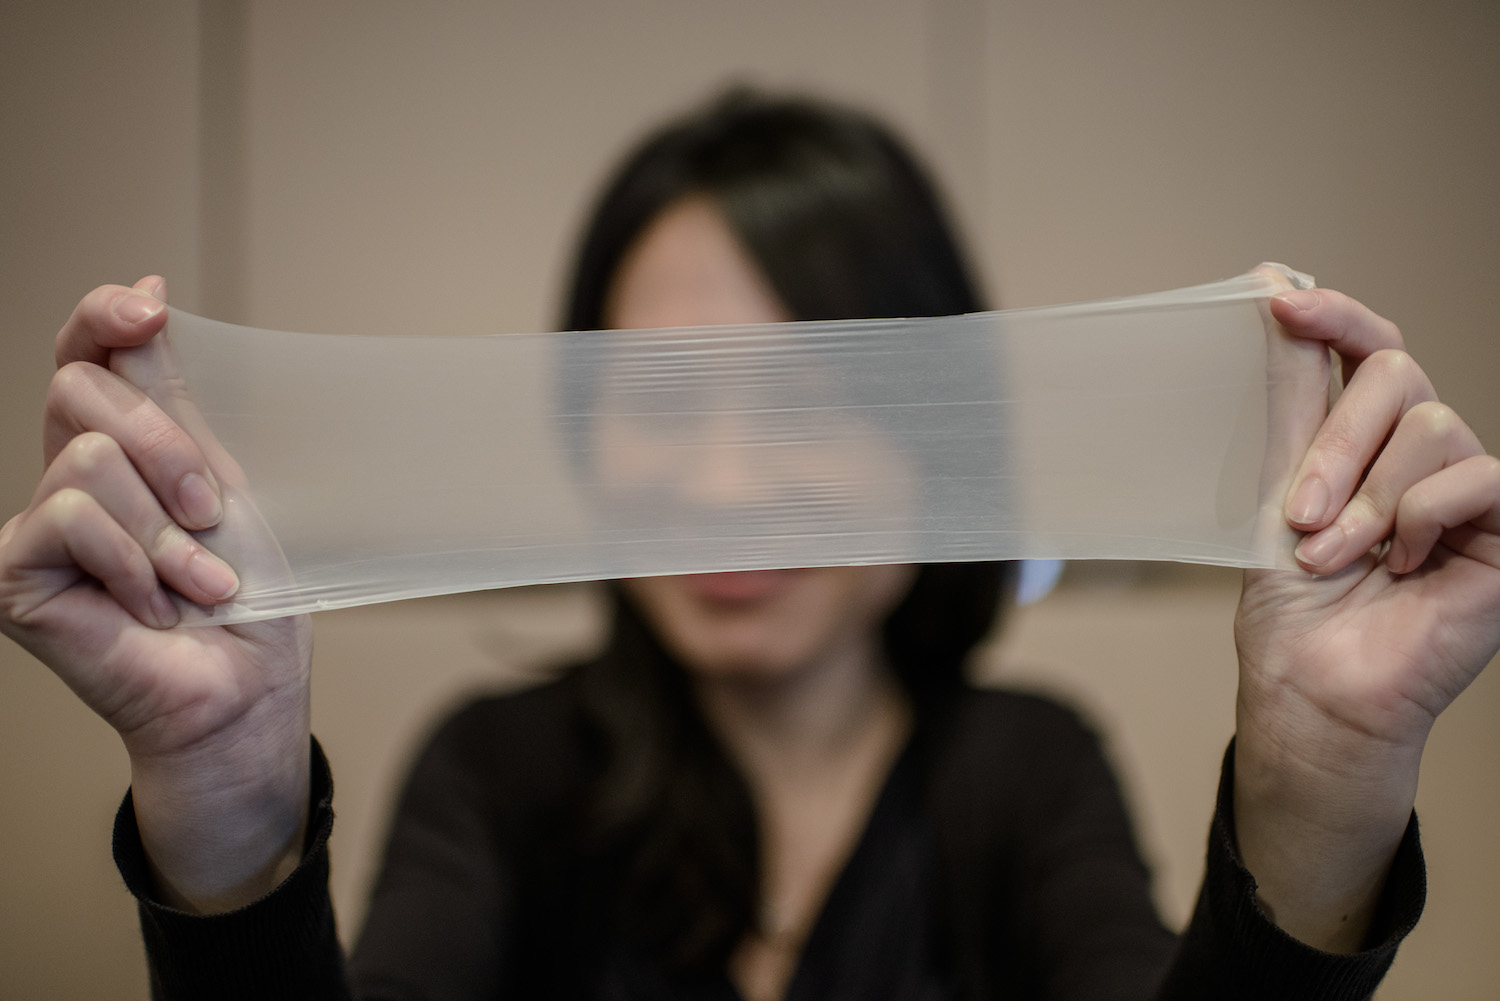 A woman streches a piece of latex from which the world's thinnest latex condoms are made during a press conference in Hong Kong on February 20, 2014. The condoms manufactured by the Chinese company Guangzhou Daming United Rubber Products Limited are 0.036mm thin on average and listed on the Guinness Records book as the "thinnest latex condom". AFP PHOTO / Philippe Lopez (Photo credit should read PHILIPPE LOPEZ/AFP/Getty Images)